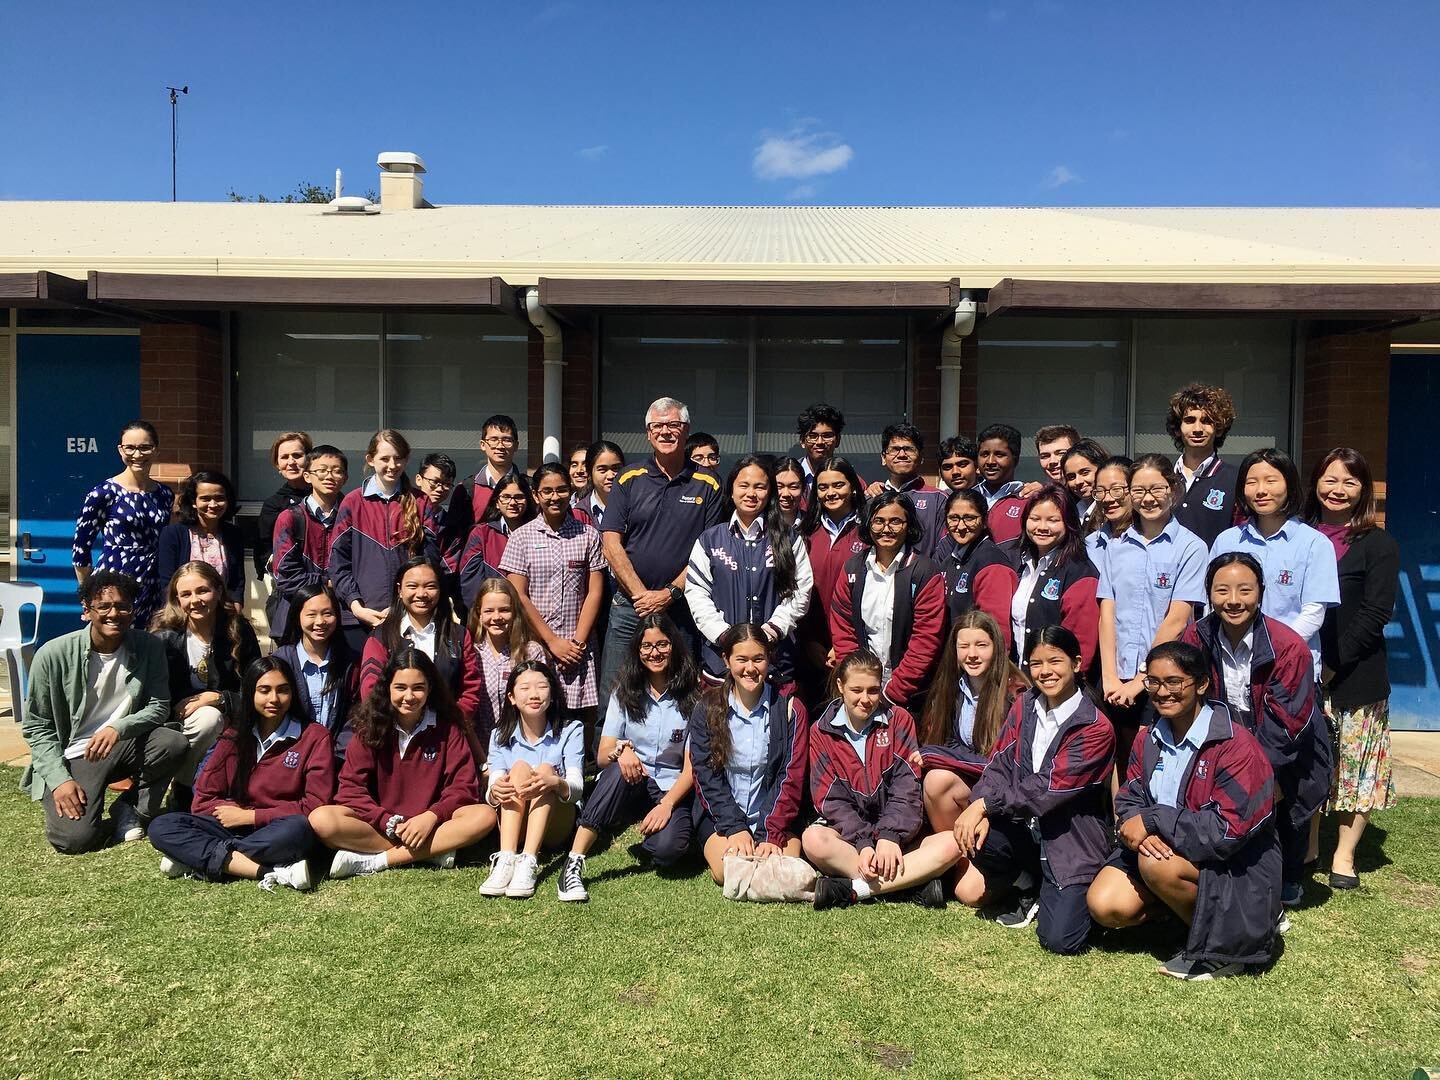 The Interact Club at Willetton Senior High School voted to support&nbsp;Tiny Sparks WA&nbsp;with the funds made from a fundraiser, Spring Cool Down, where they sold drinks, ice creams, and icy poles to students.  Interact is a youth branch of Rotary 